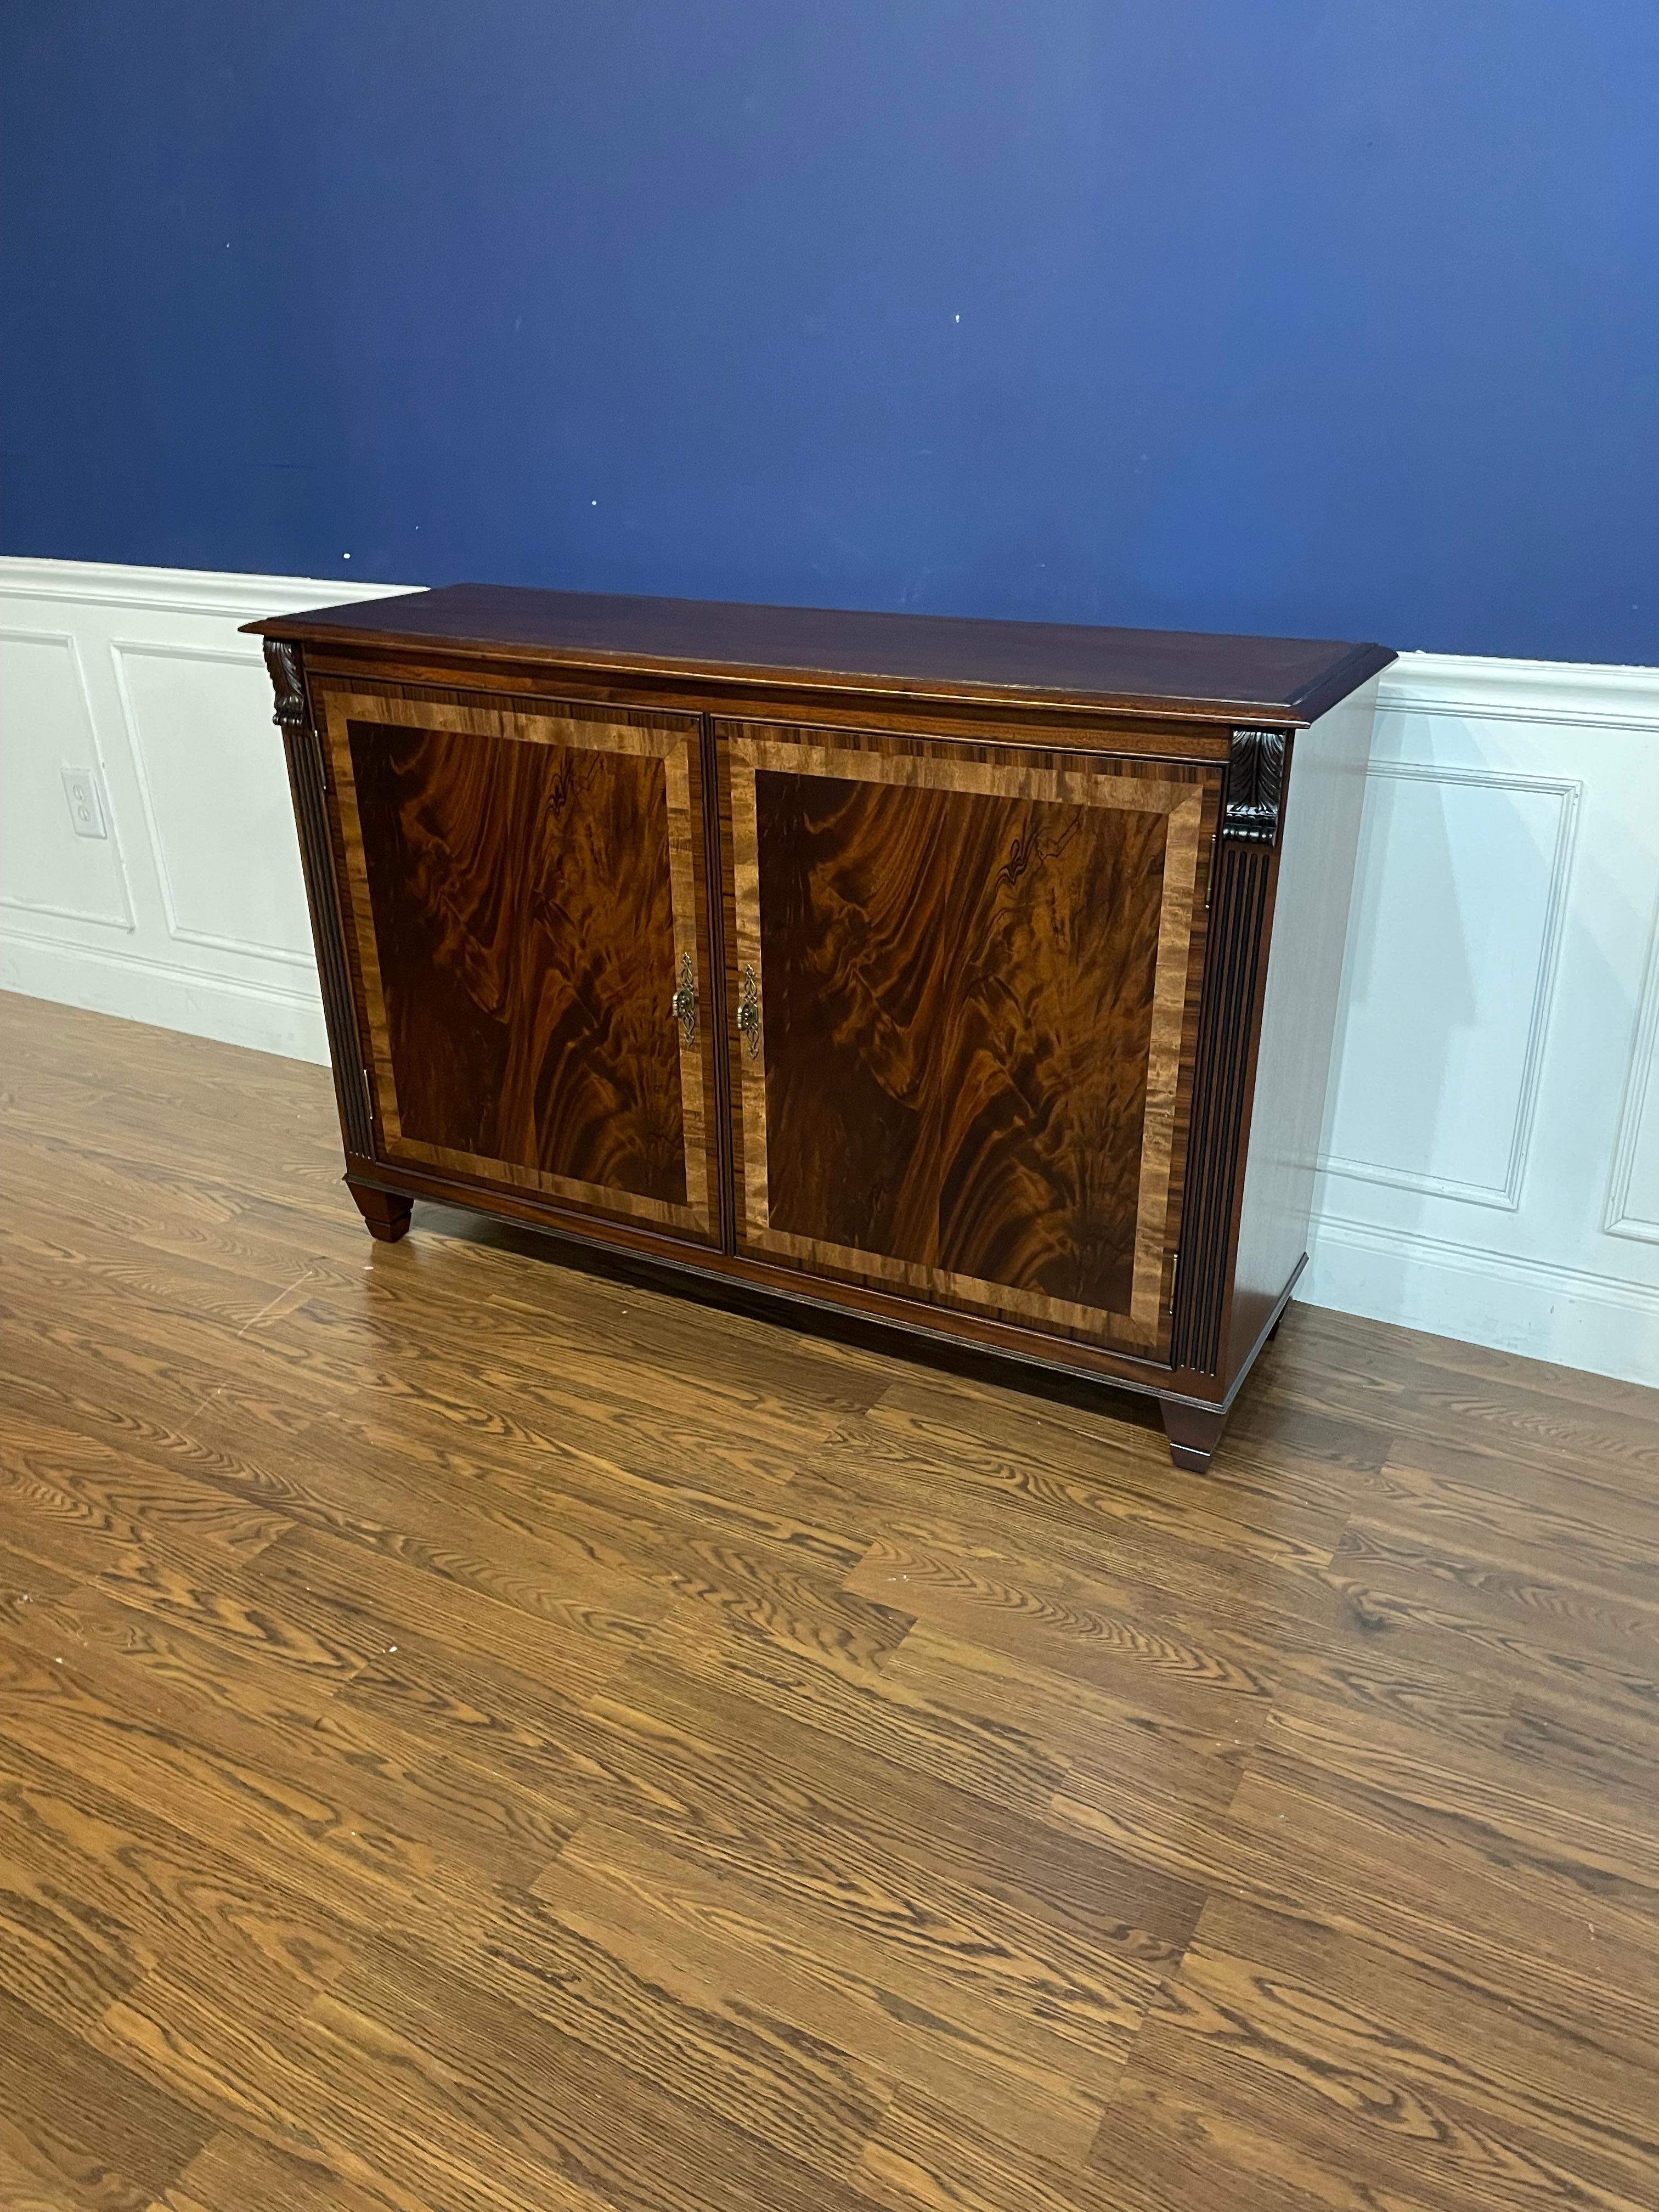 This is made-to-order traditional mahogany two door buffet or credenza made in the Leighton Hall shop. It features two doors with reverse-slip-match swirly crotch mahogany fields and Satinwood and Santos Rosewood (Pau Ferro) borders. It has a